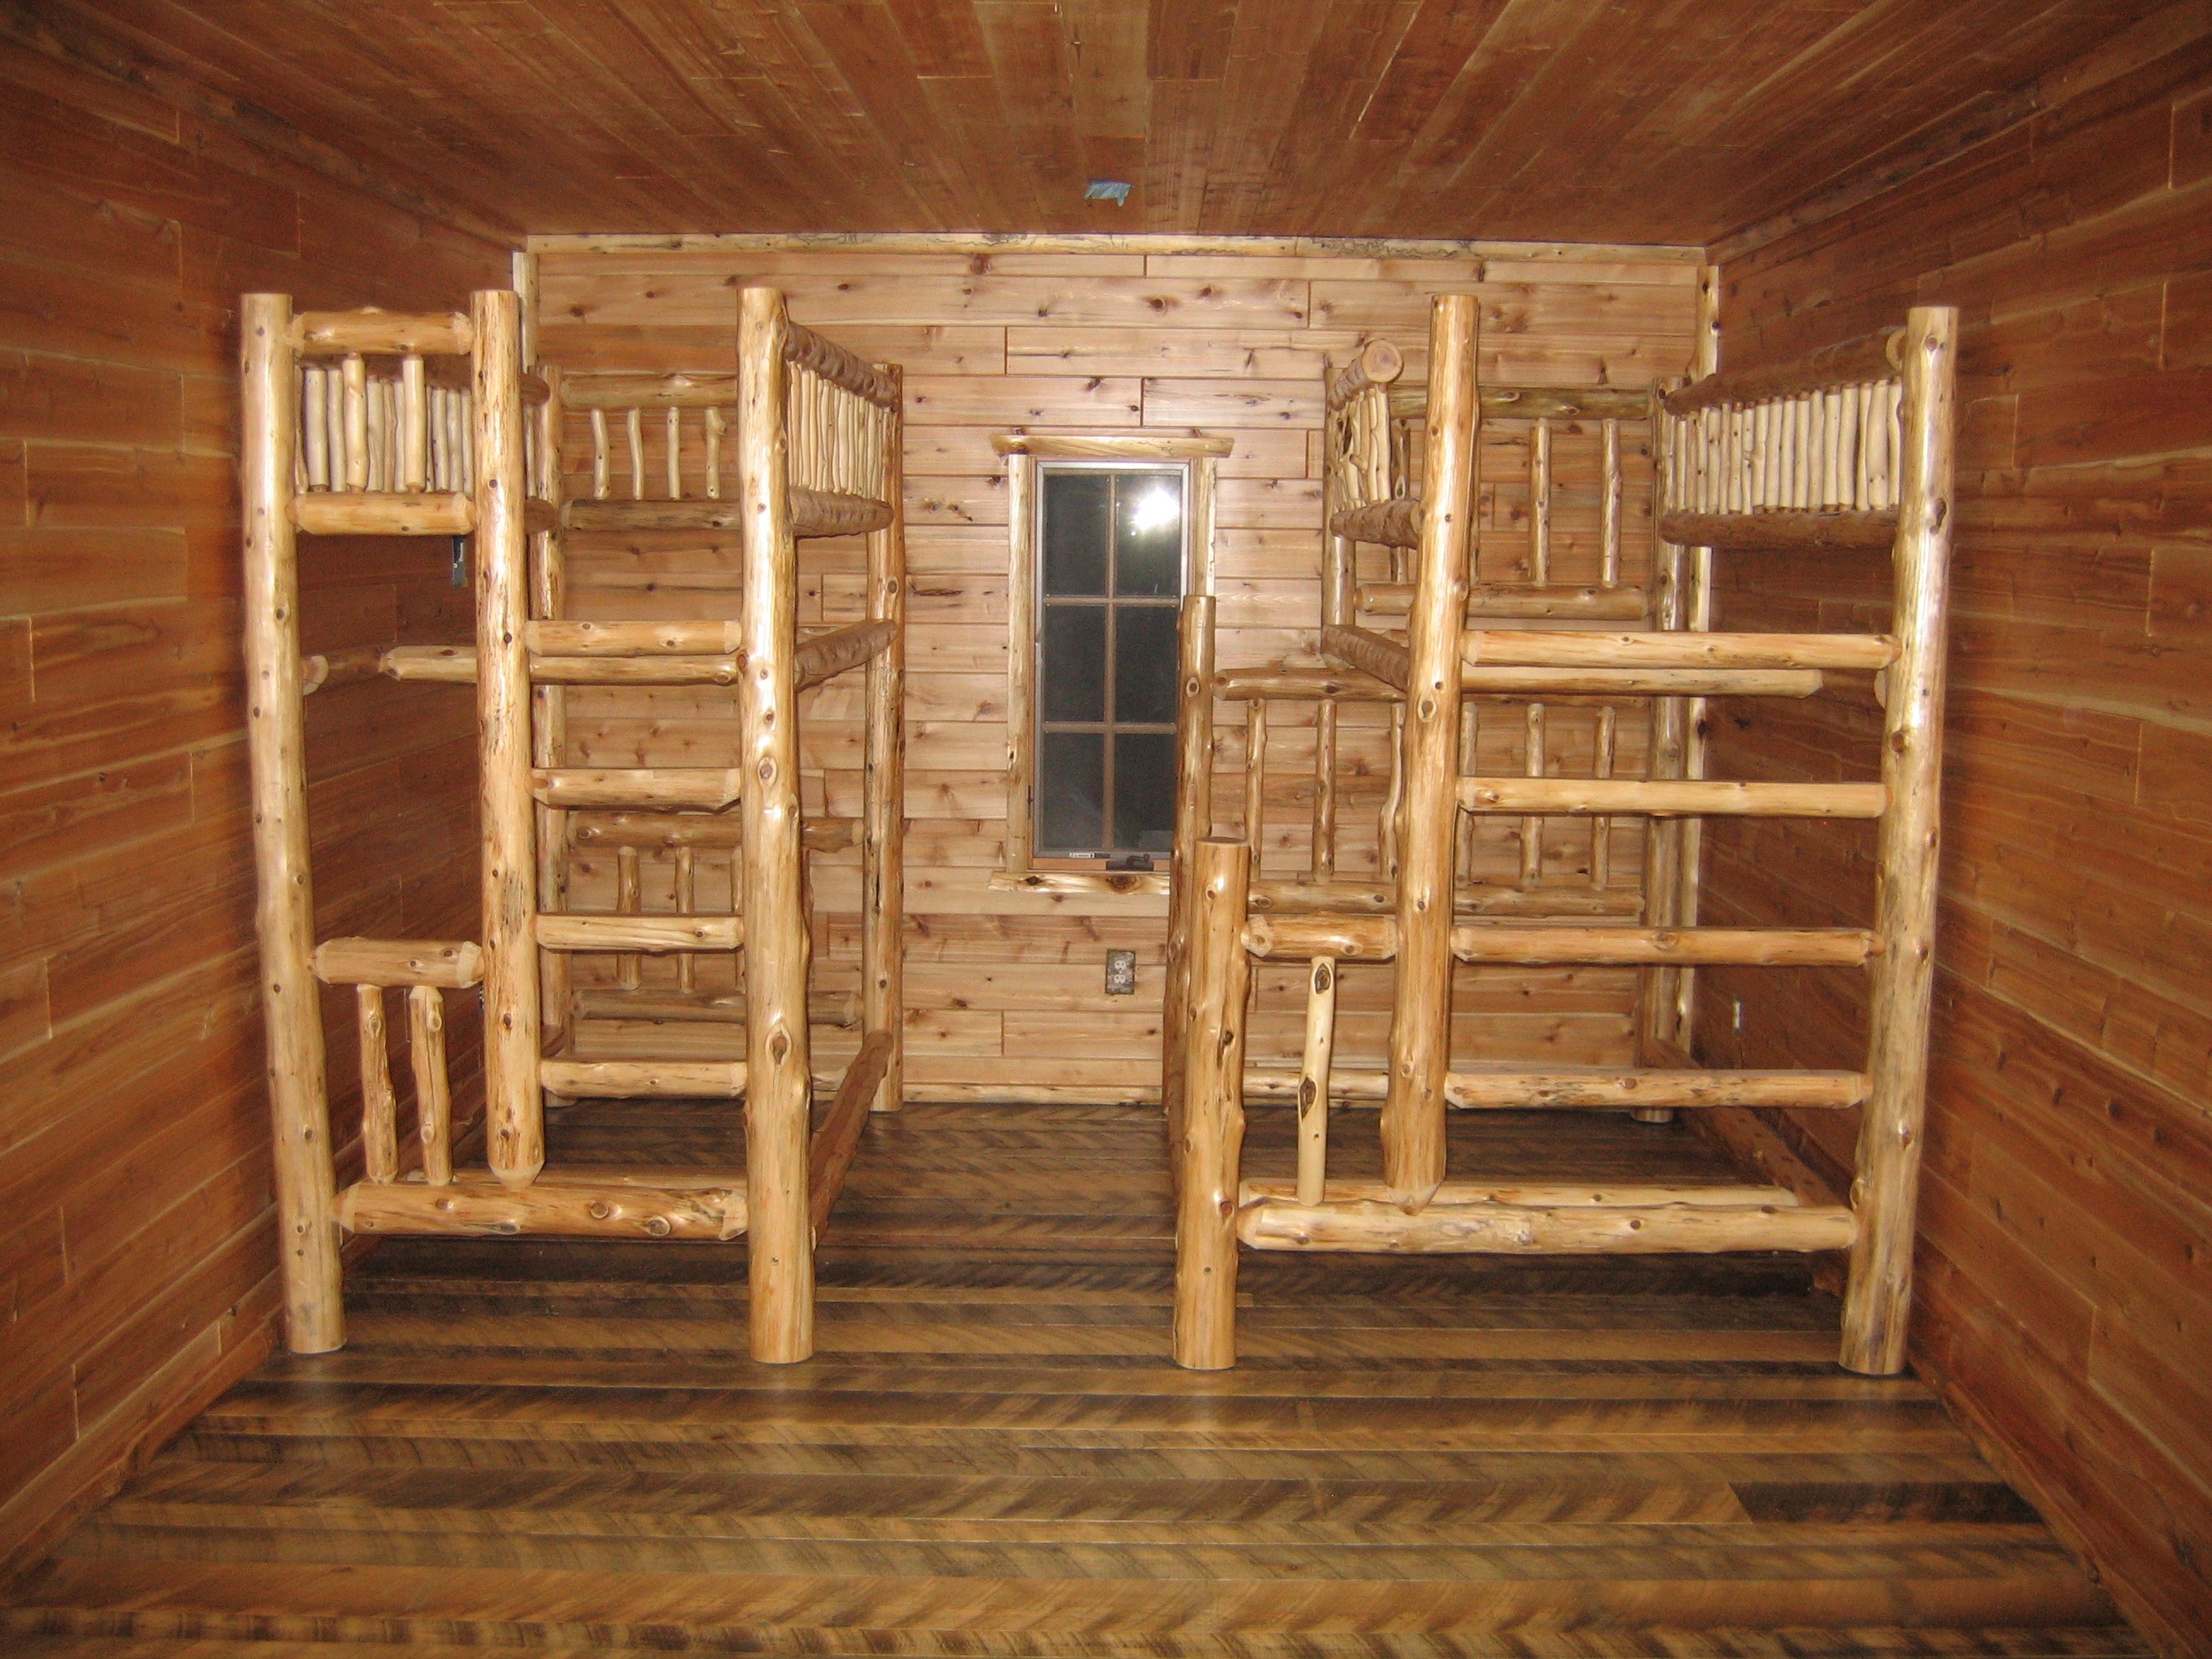 Custom Bunk house bunk bed frames hewn from natural wood logs